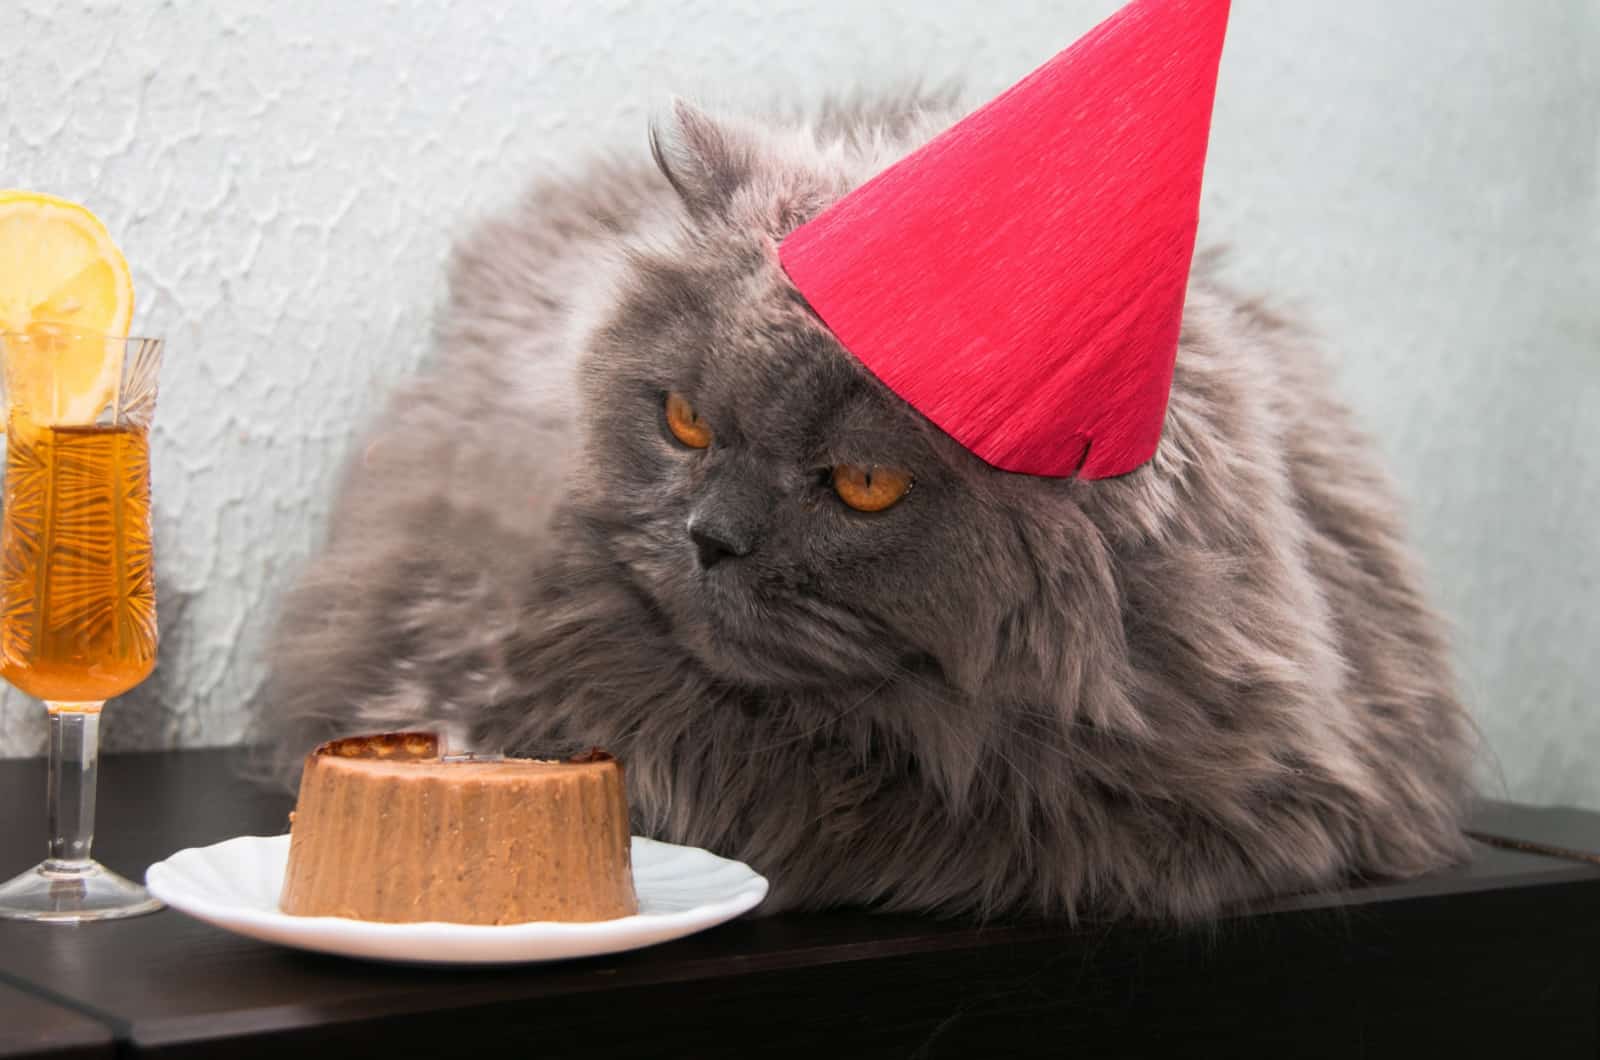 funny cat eating a birthday cake